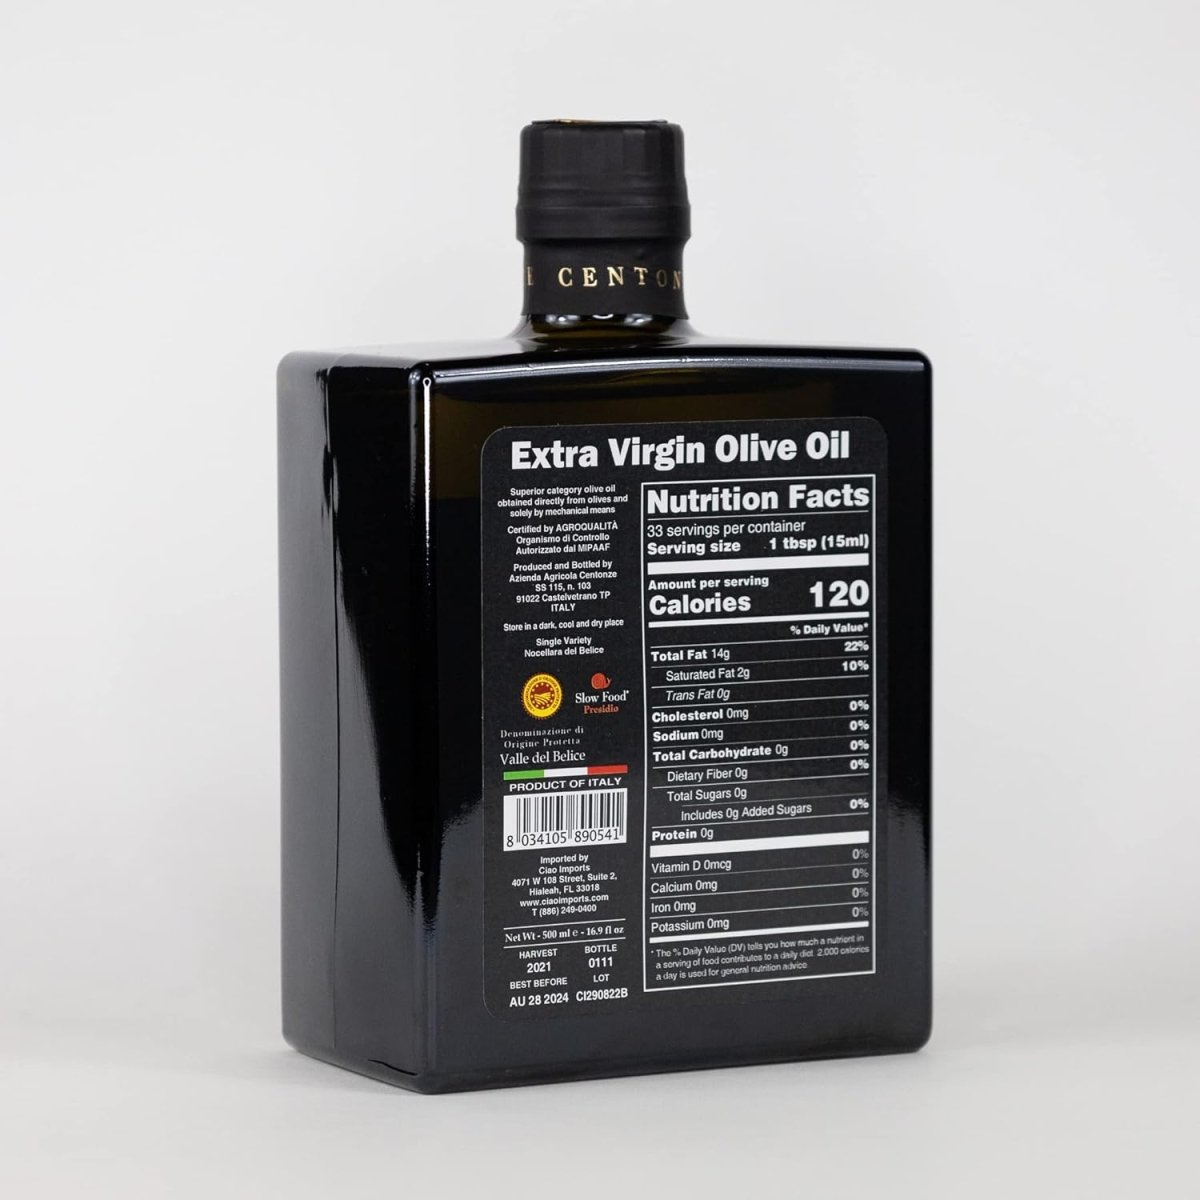 What Makes a 'DOP' Olive Oil Different? - Olive Oil Times